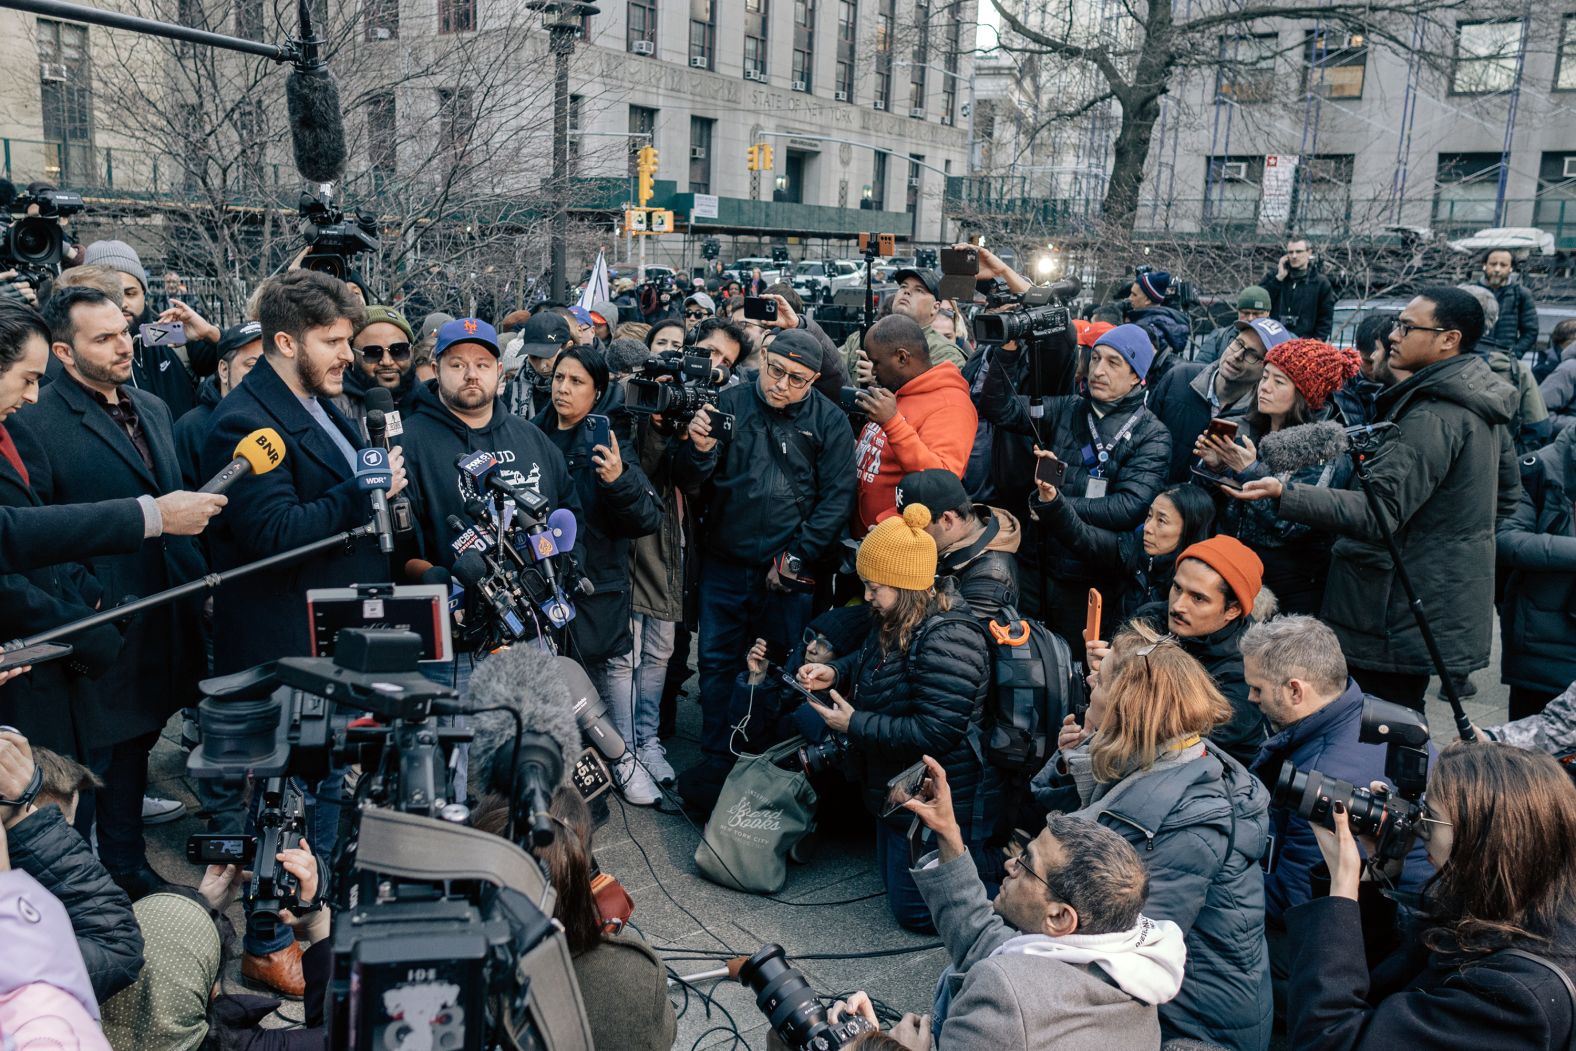 Gavin Wax, president of the New York Young Republican Club, speaks to members of the media on March 20, a couple of days after Trump said he expected to be arrested. "We are here to show that there is support for President Trump in the bluest area in the country, here in Manhattan," Wax said, <a href="https://www.politico.com/news/2023/03/20/pro-trump-protest-turnout-arrest-design-00088015" target="_blank" target="_blank">according to Politico</a>.